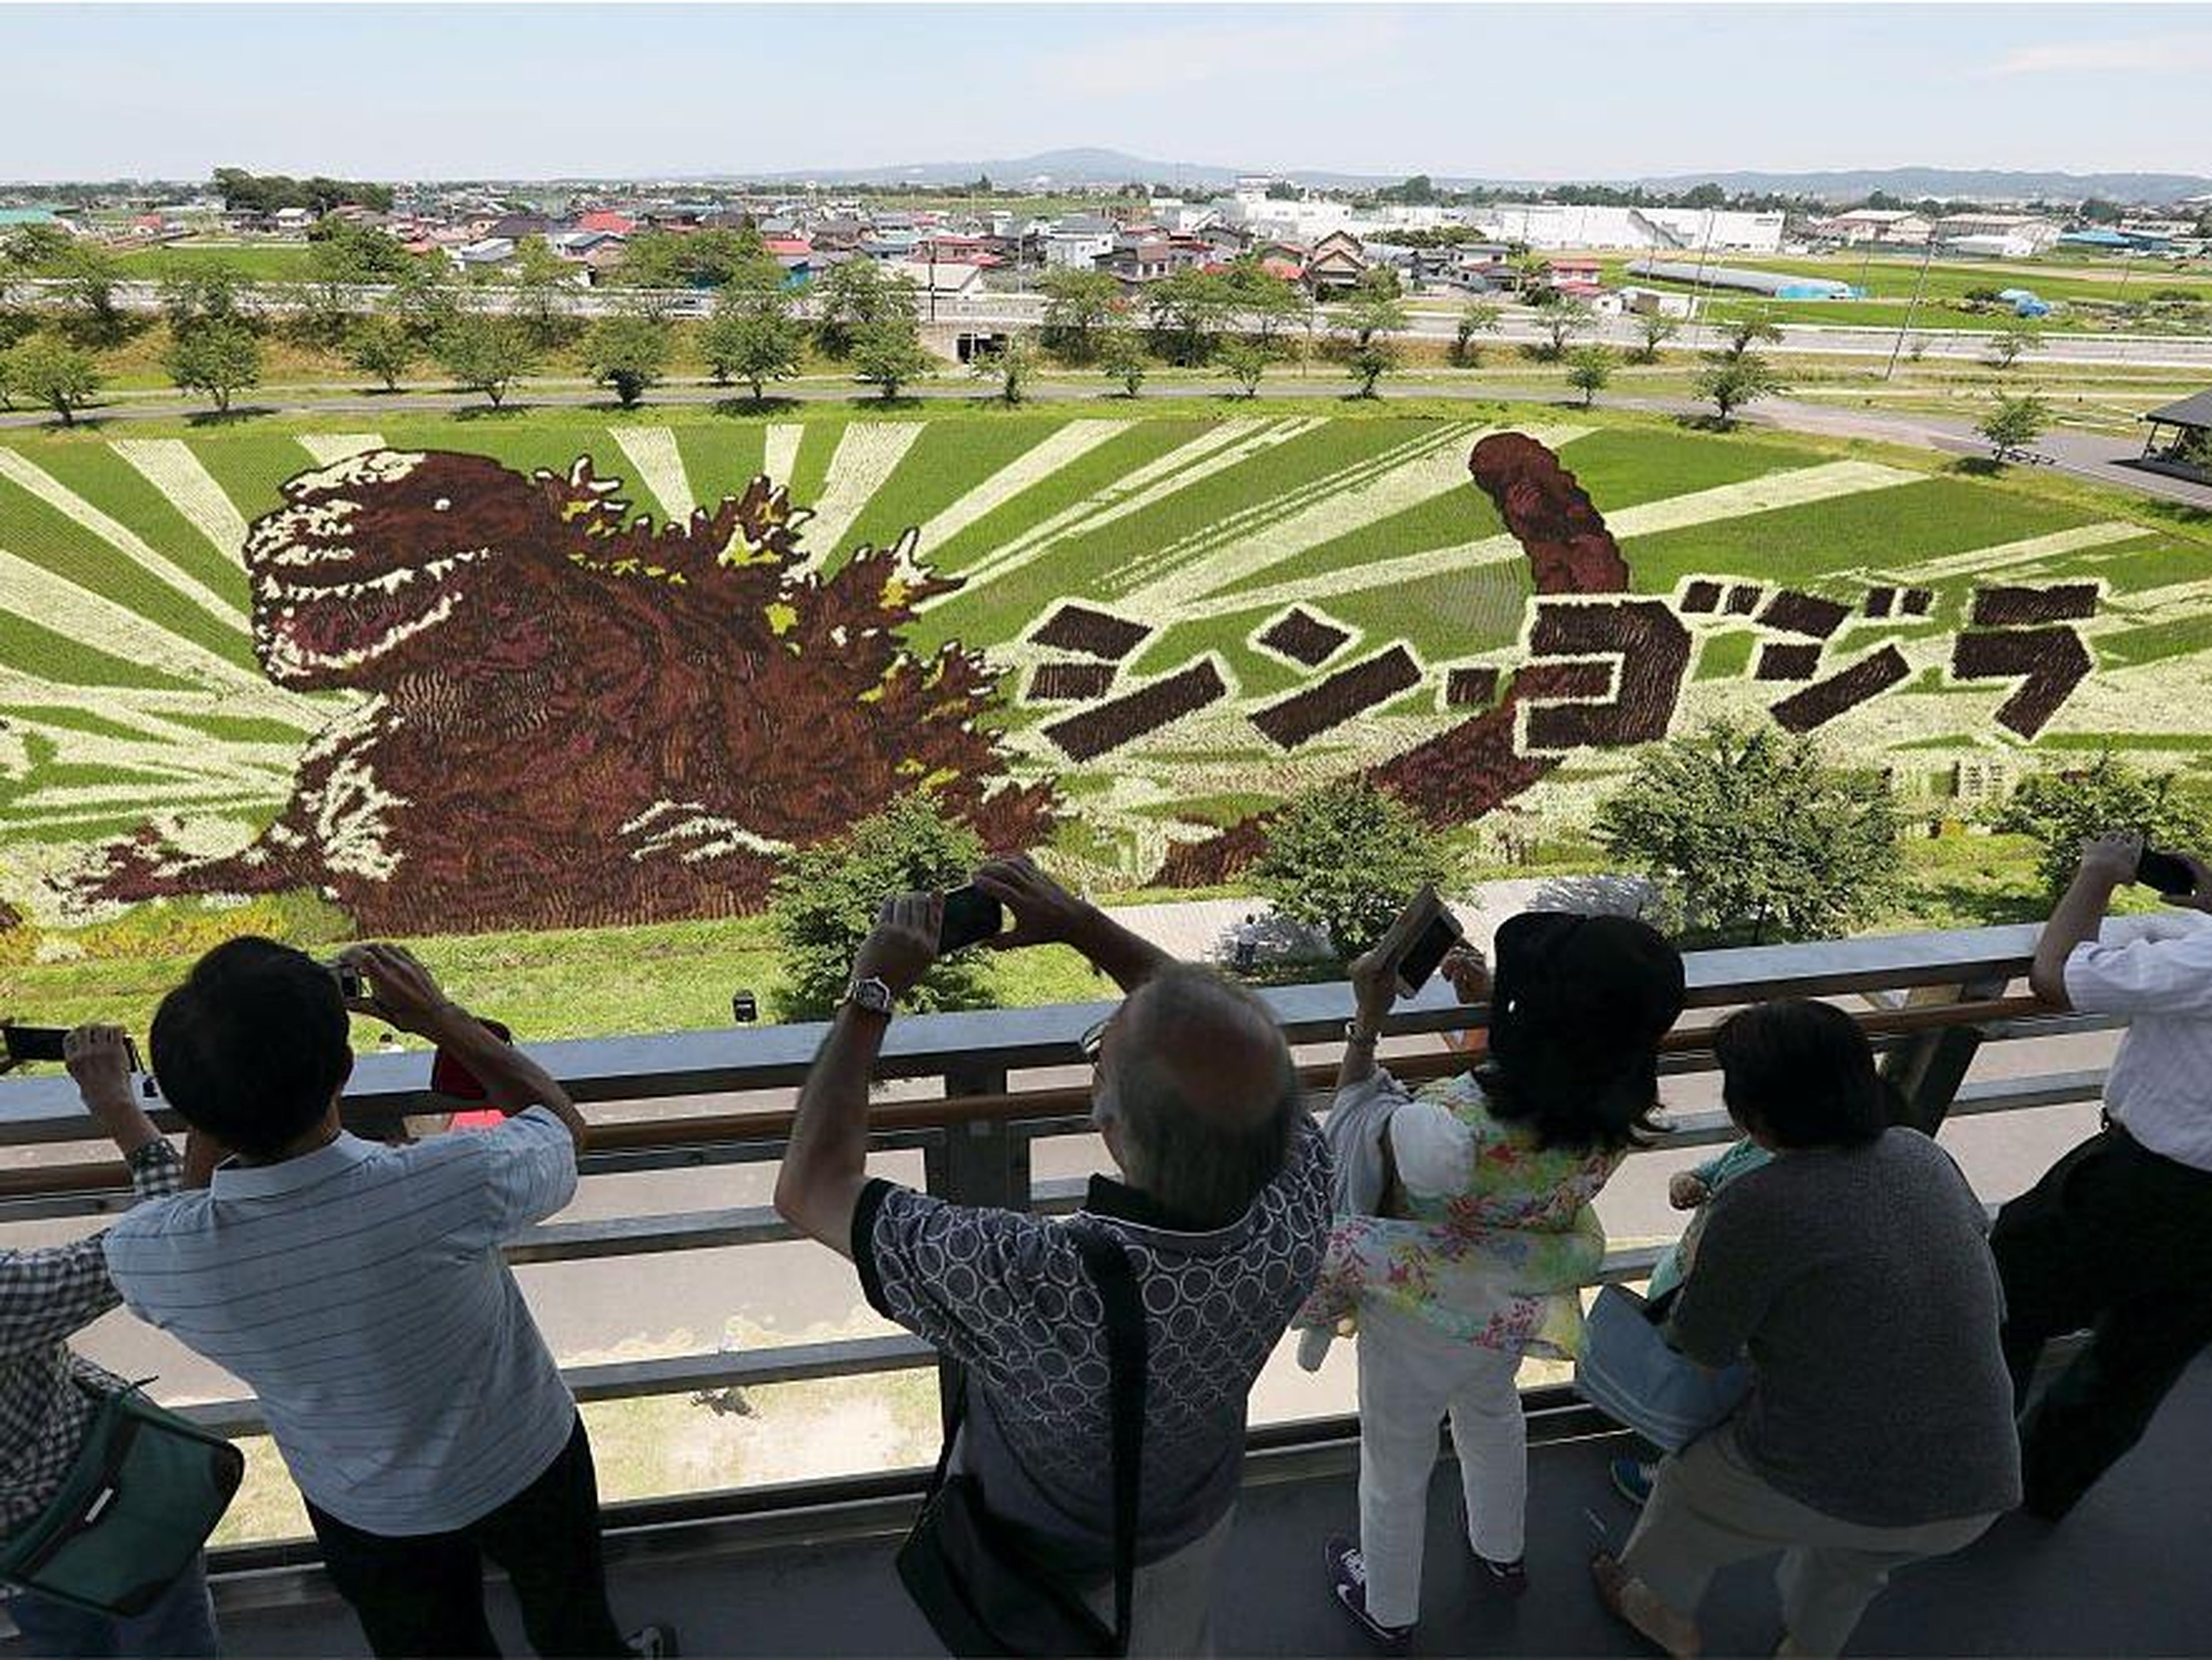 Rice paddy art combines the city's emphasis on agriculture and love of art into something everyone can experience.